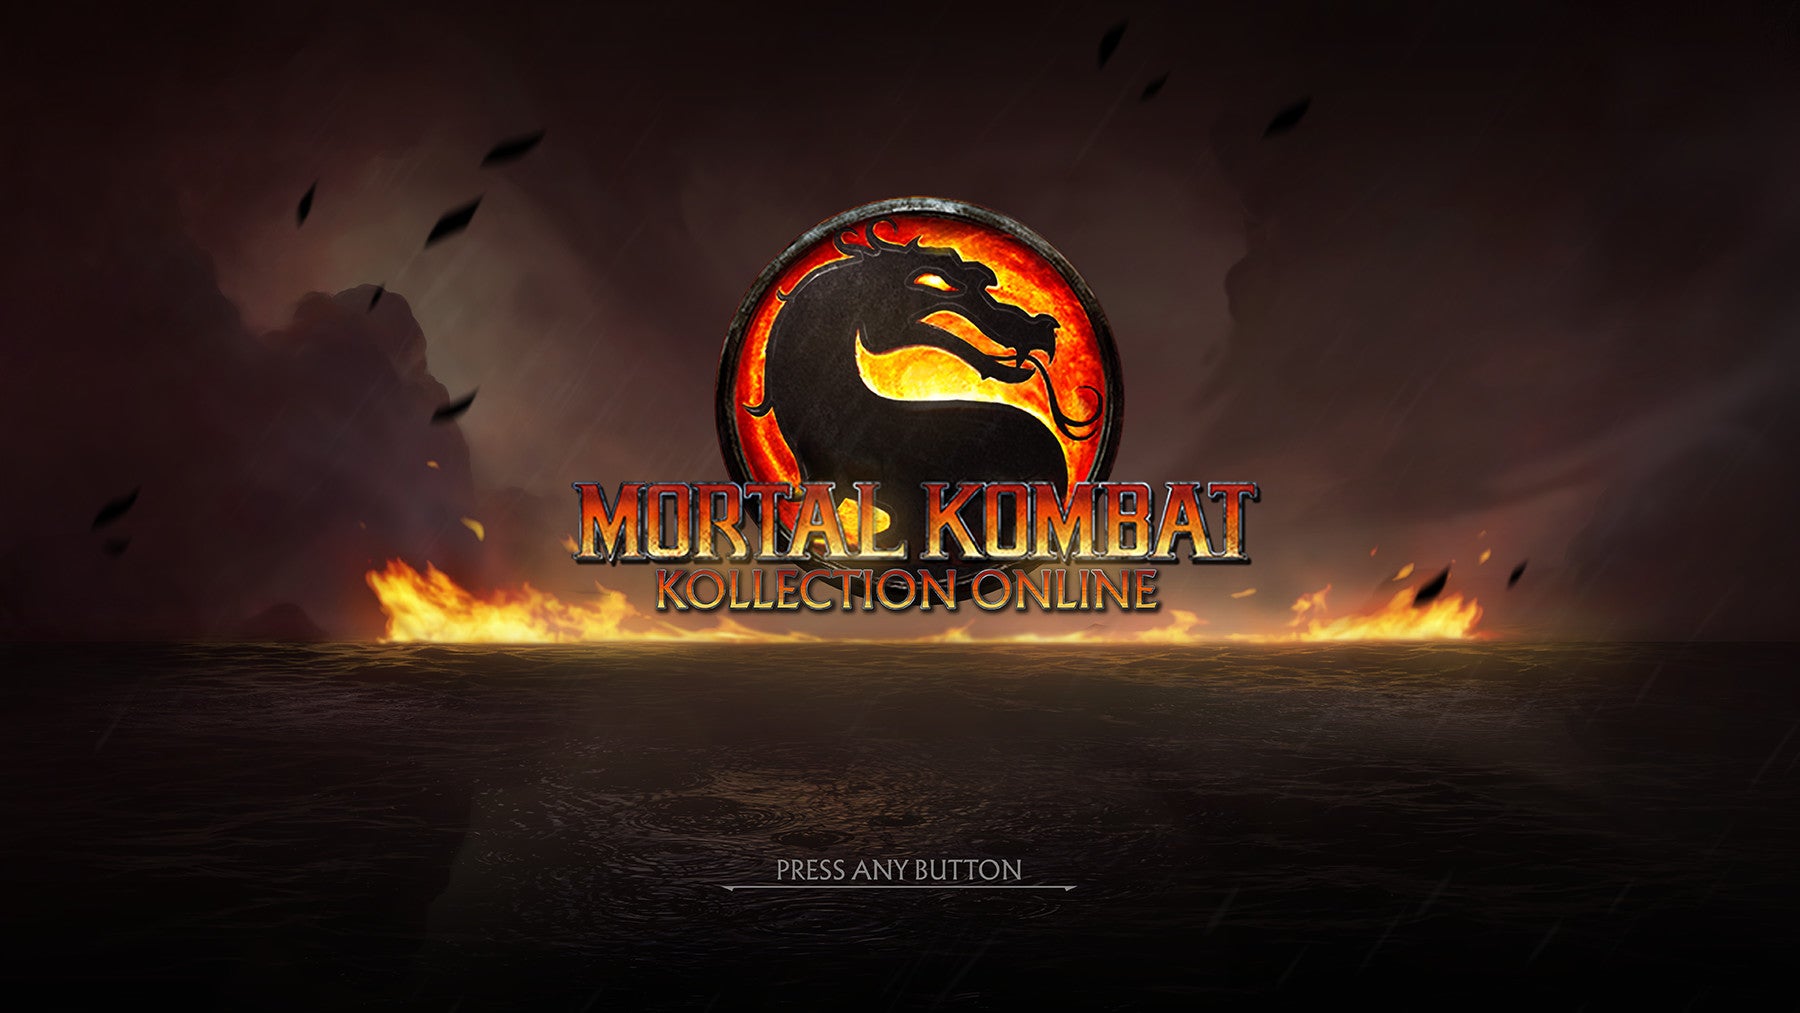 Image for Mortal Kombat trilogy remaster was in development at one point